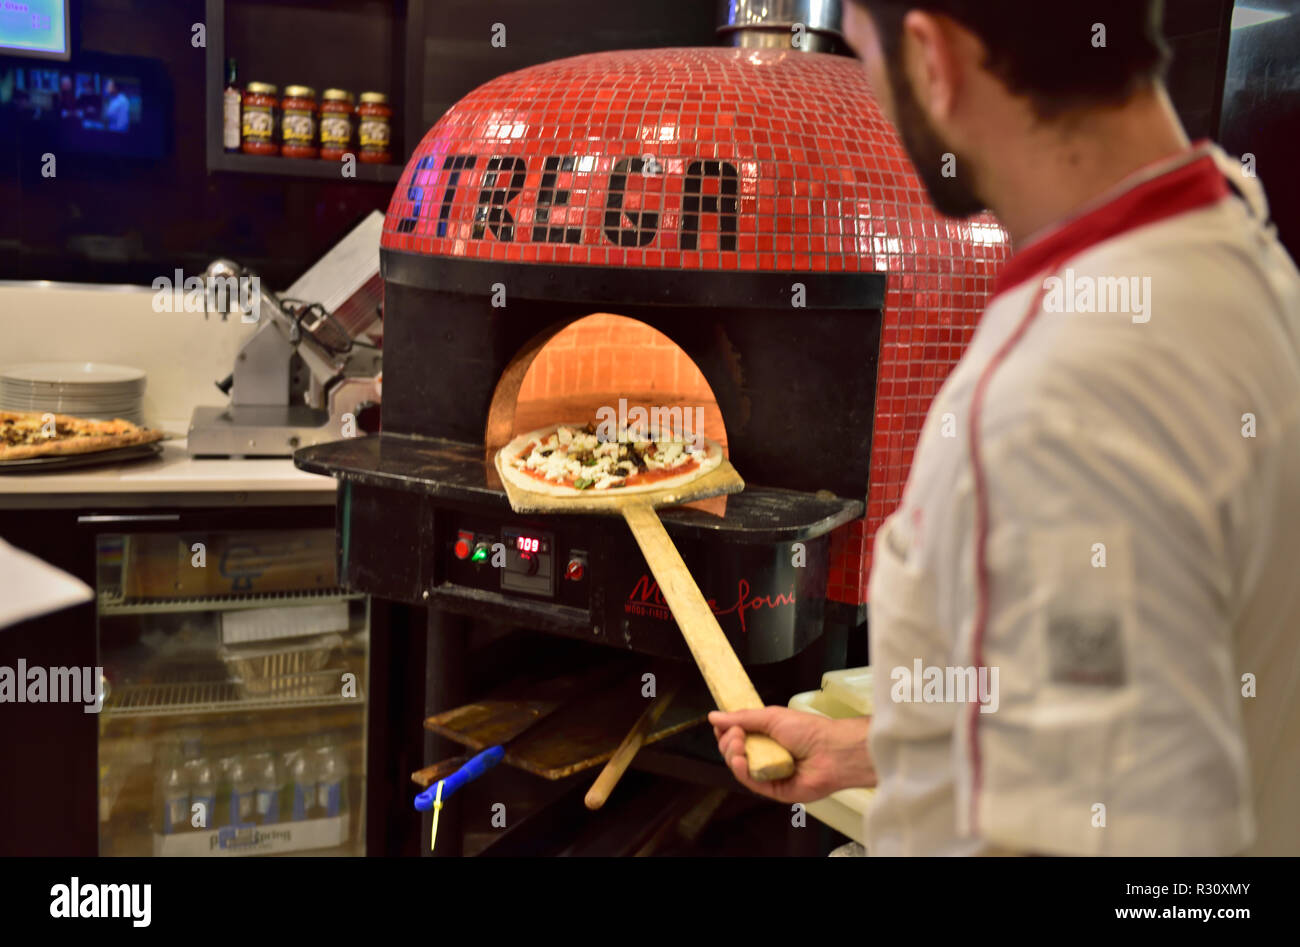 Pizza kitchen with chefs putting pizza into oven on long paddle, USA Stock Photo